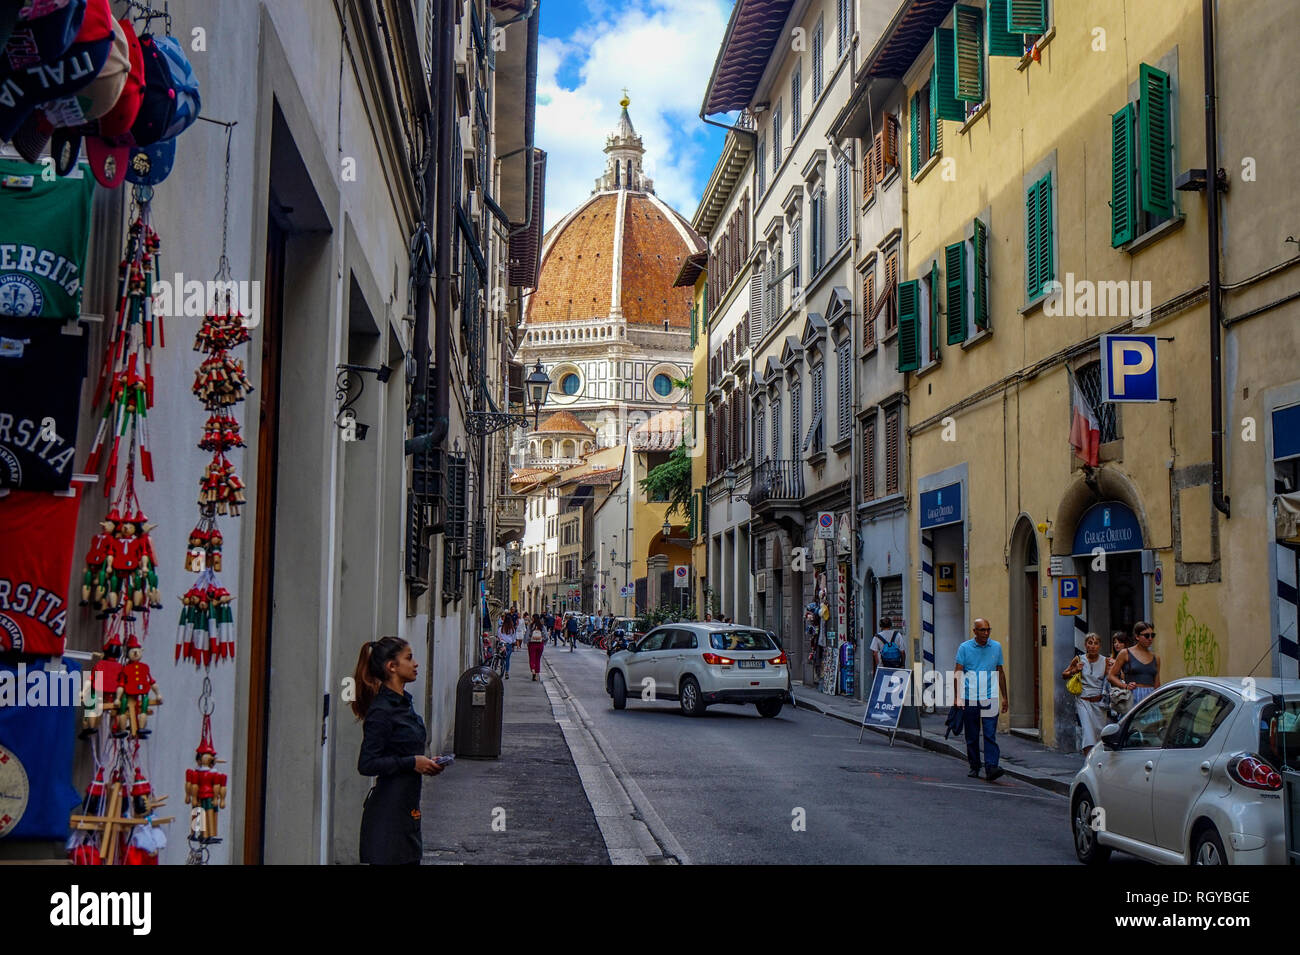 Florance, Tuscany / Italy - 09.15.2017: Cityscape streets of Florence with the Florance duomo at the end Stock Photo